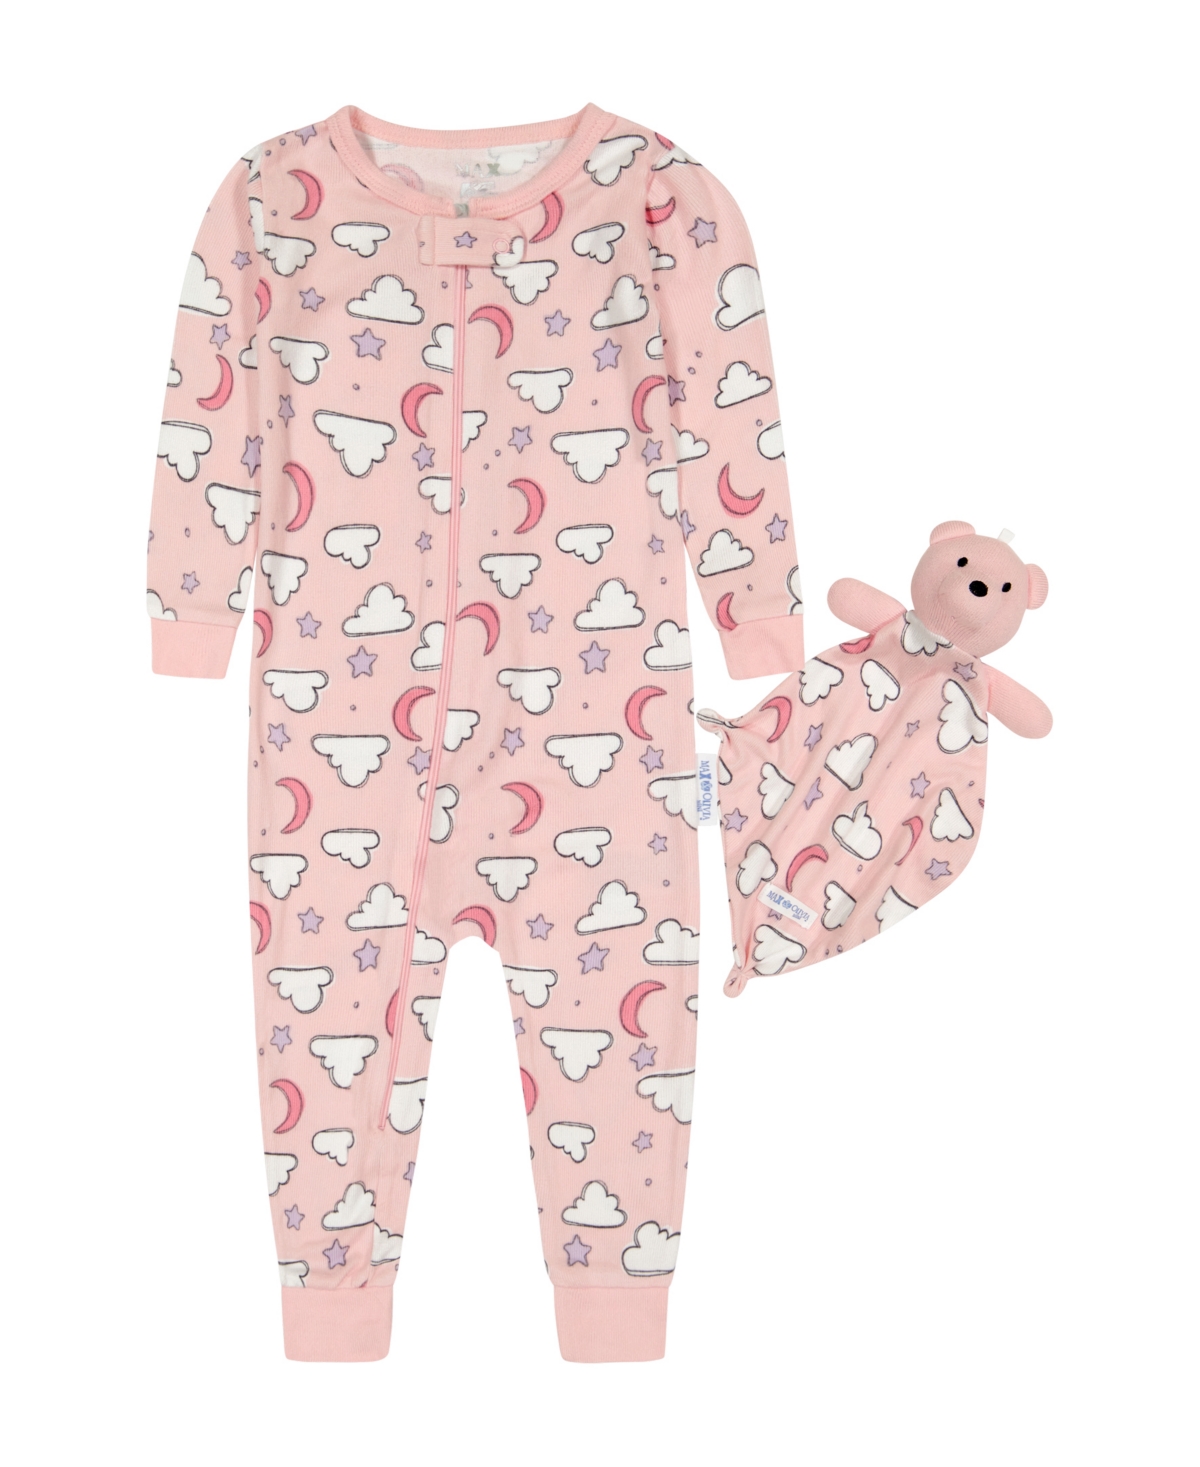 Max & Olivia Baby Girls Coverall And Matching Blanket, 2-piece Set In Pink I